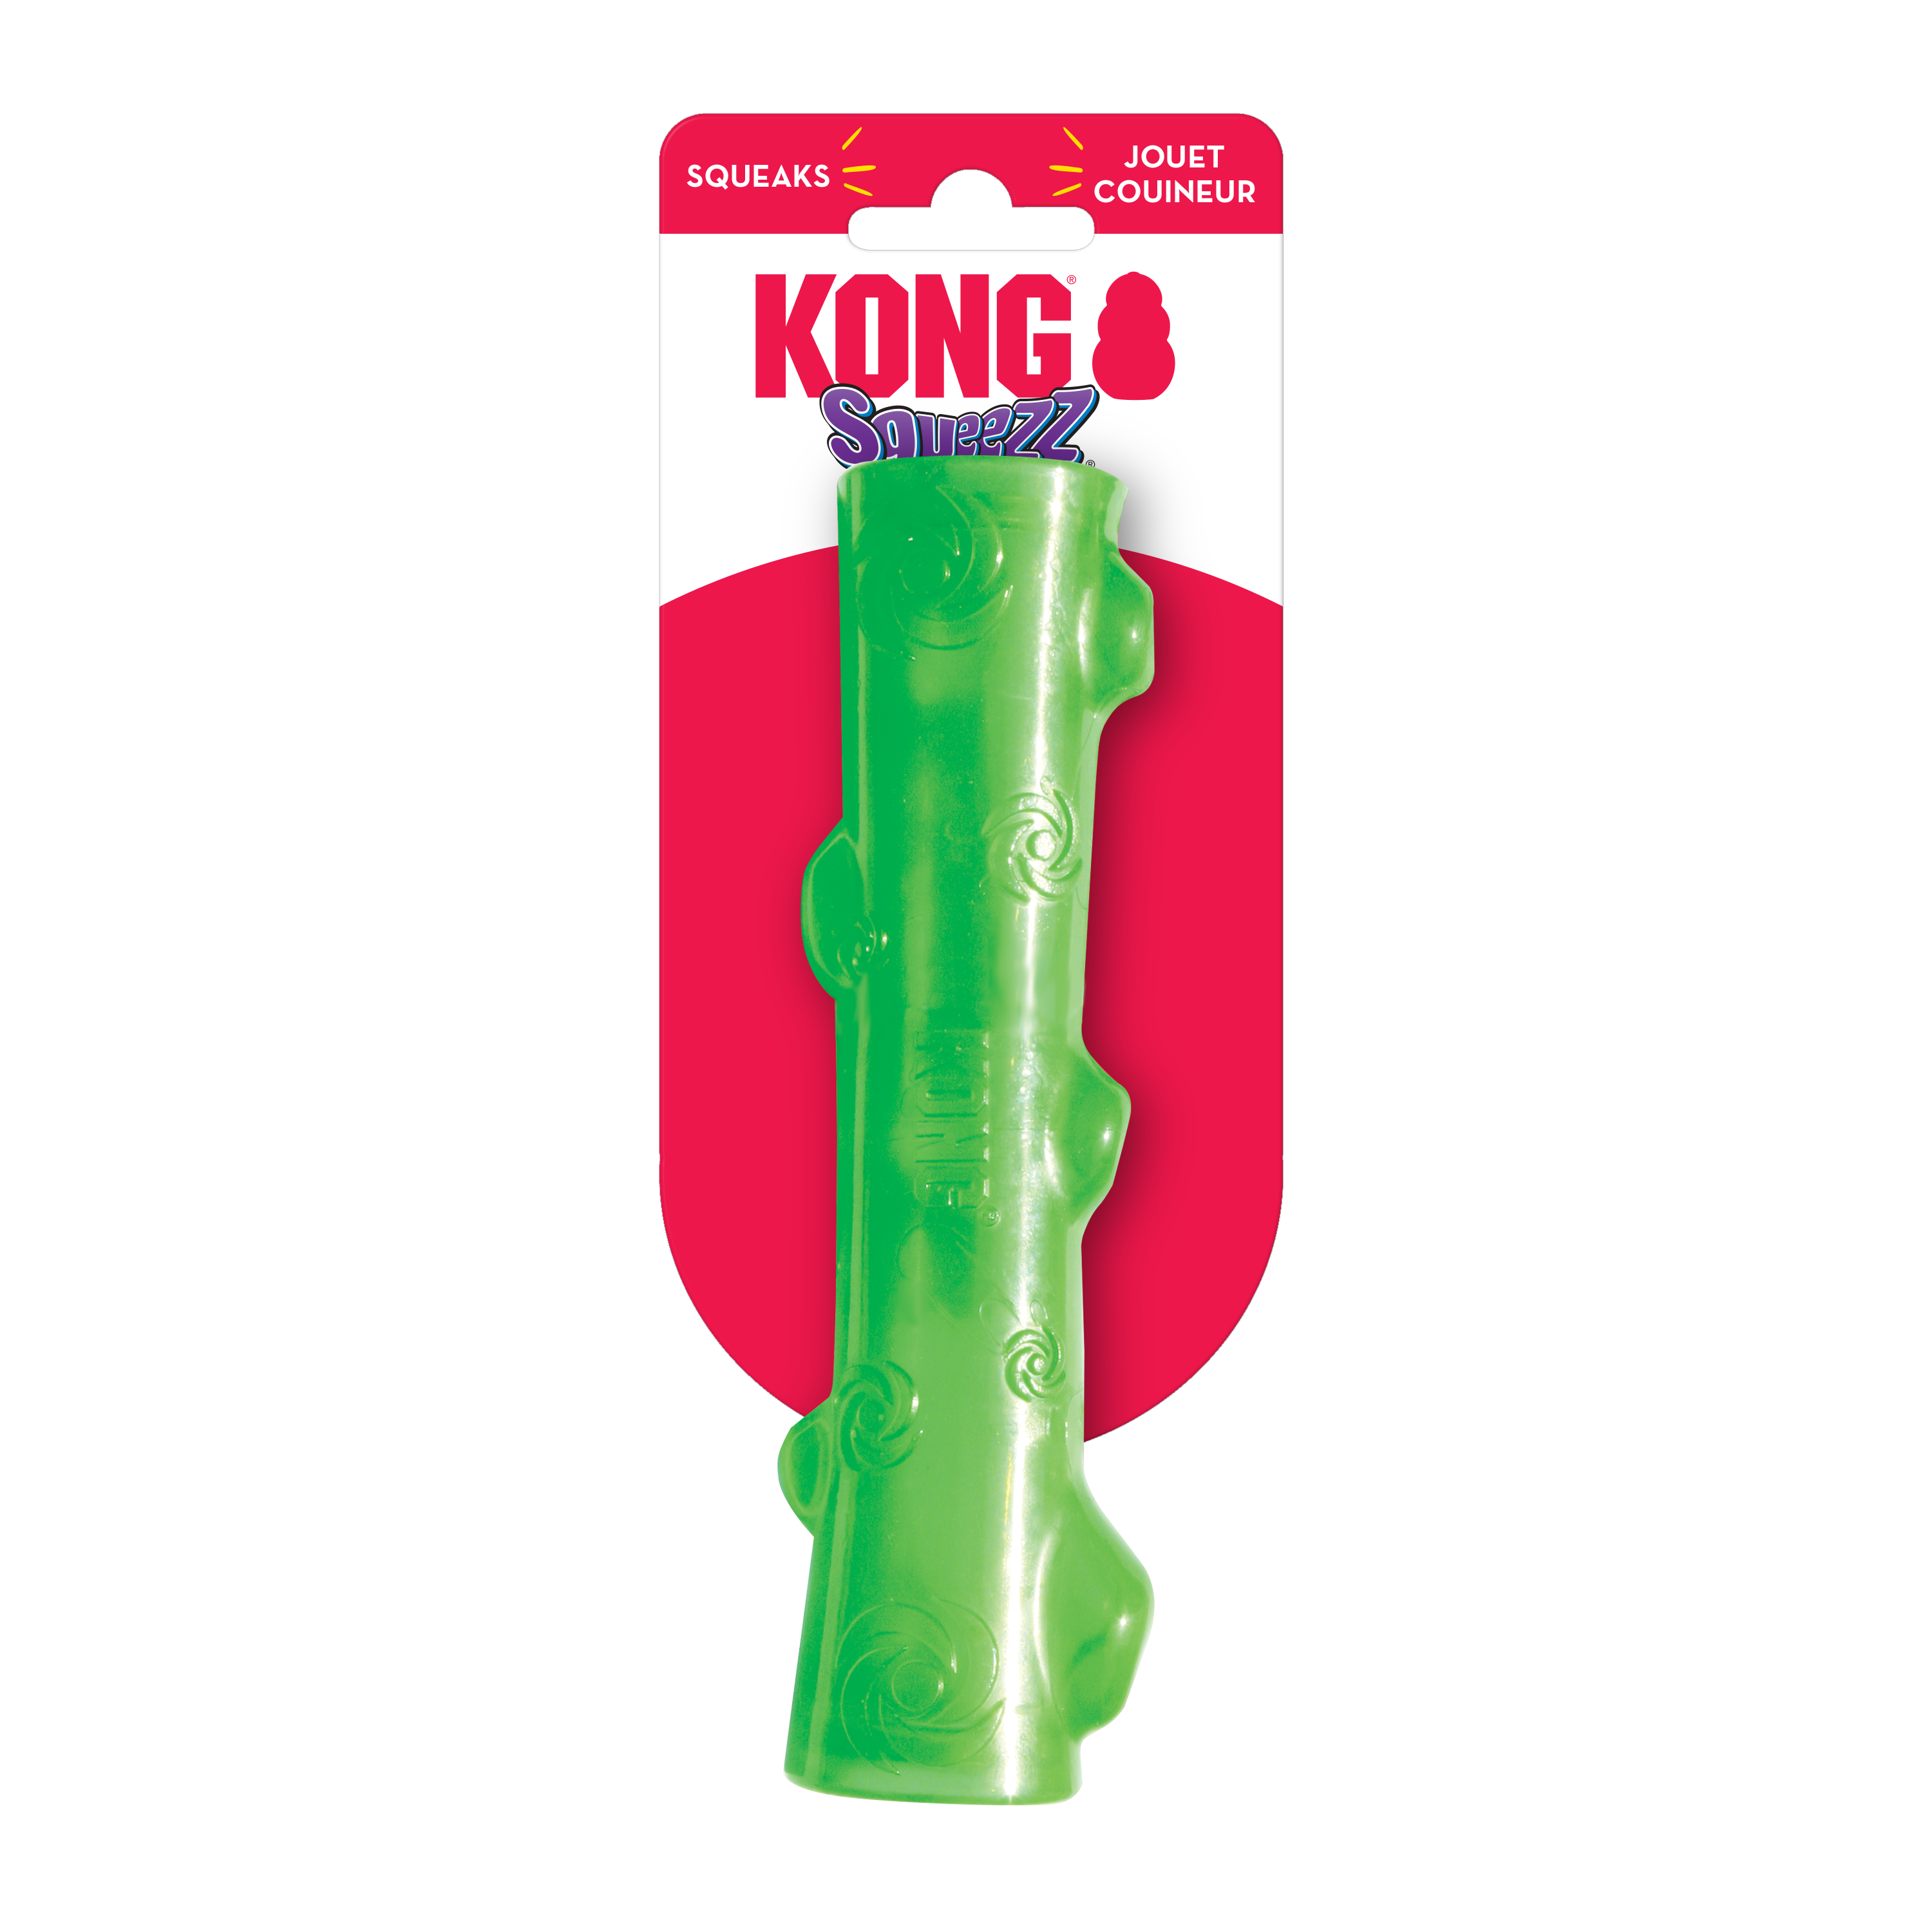 Squeezz Stick onpack product image